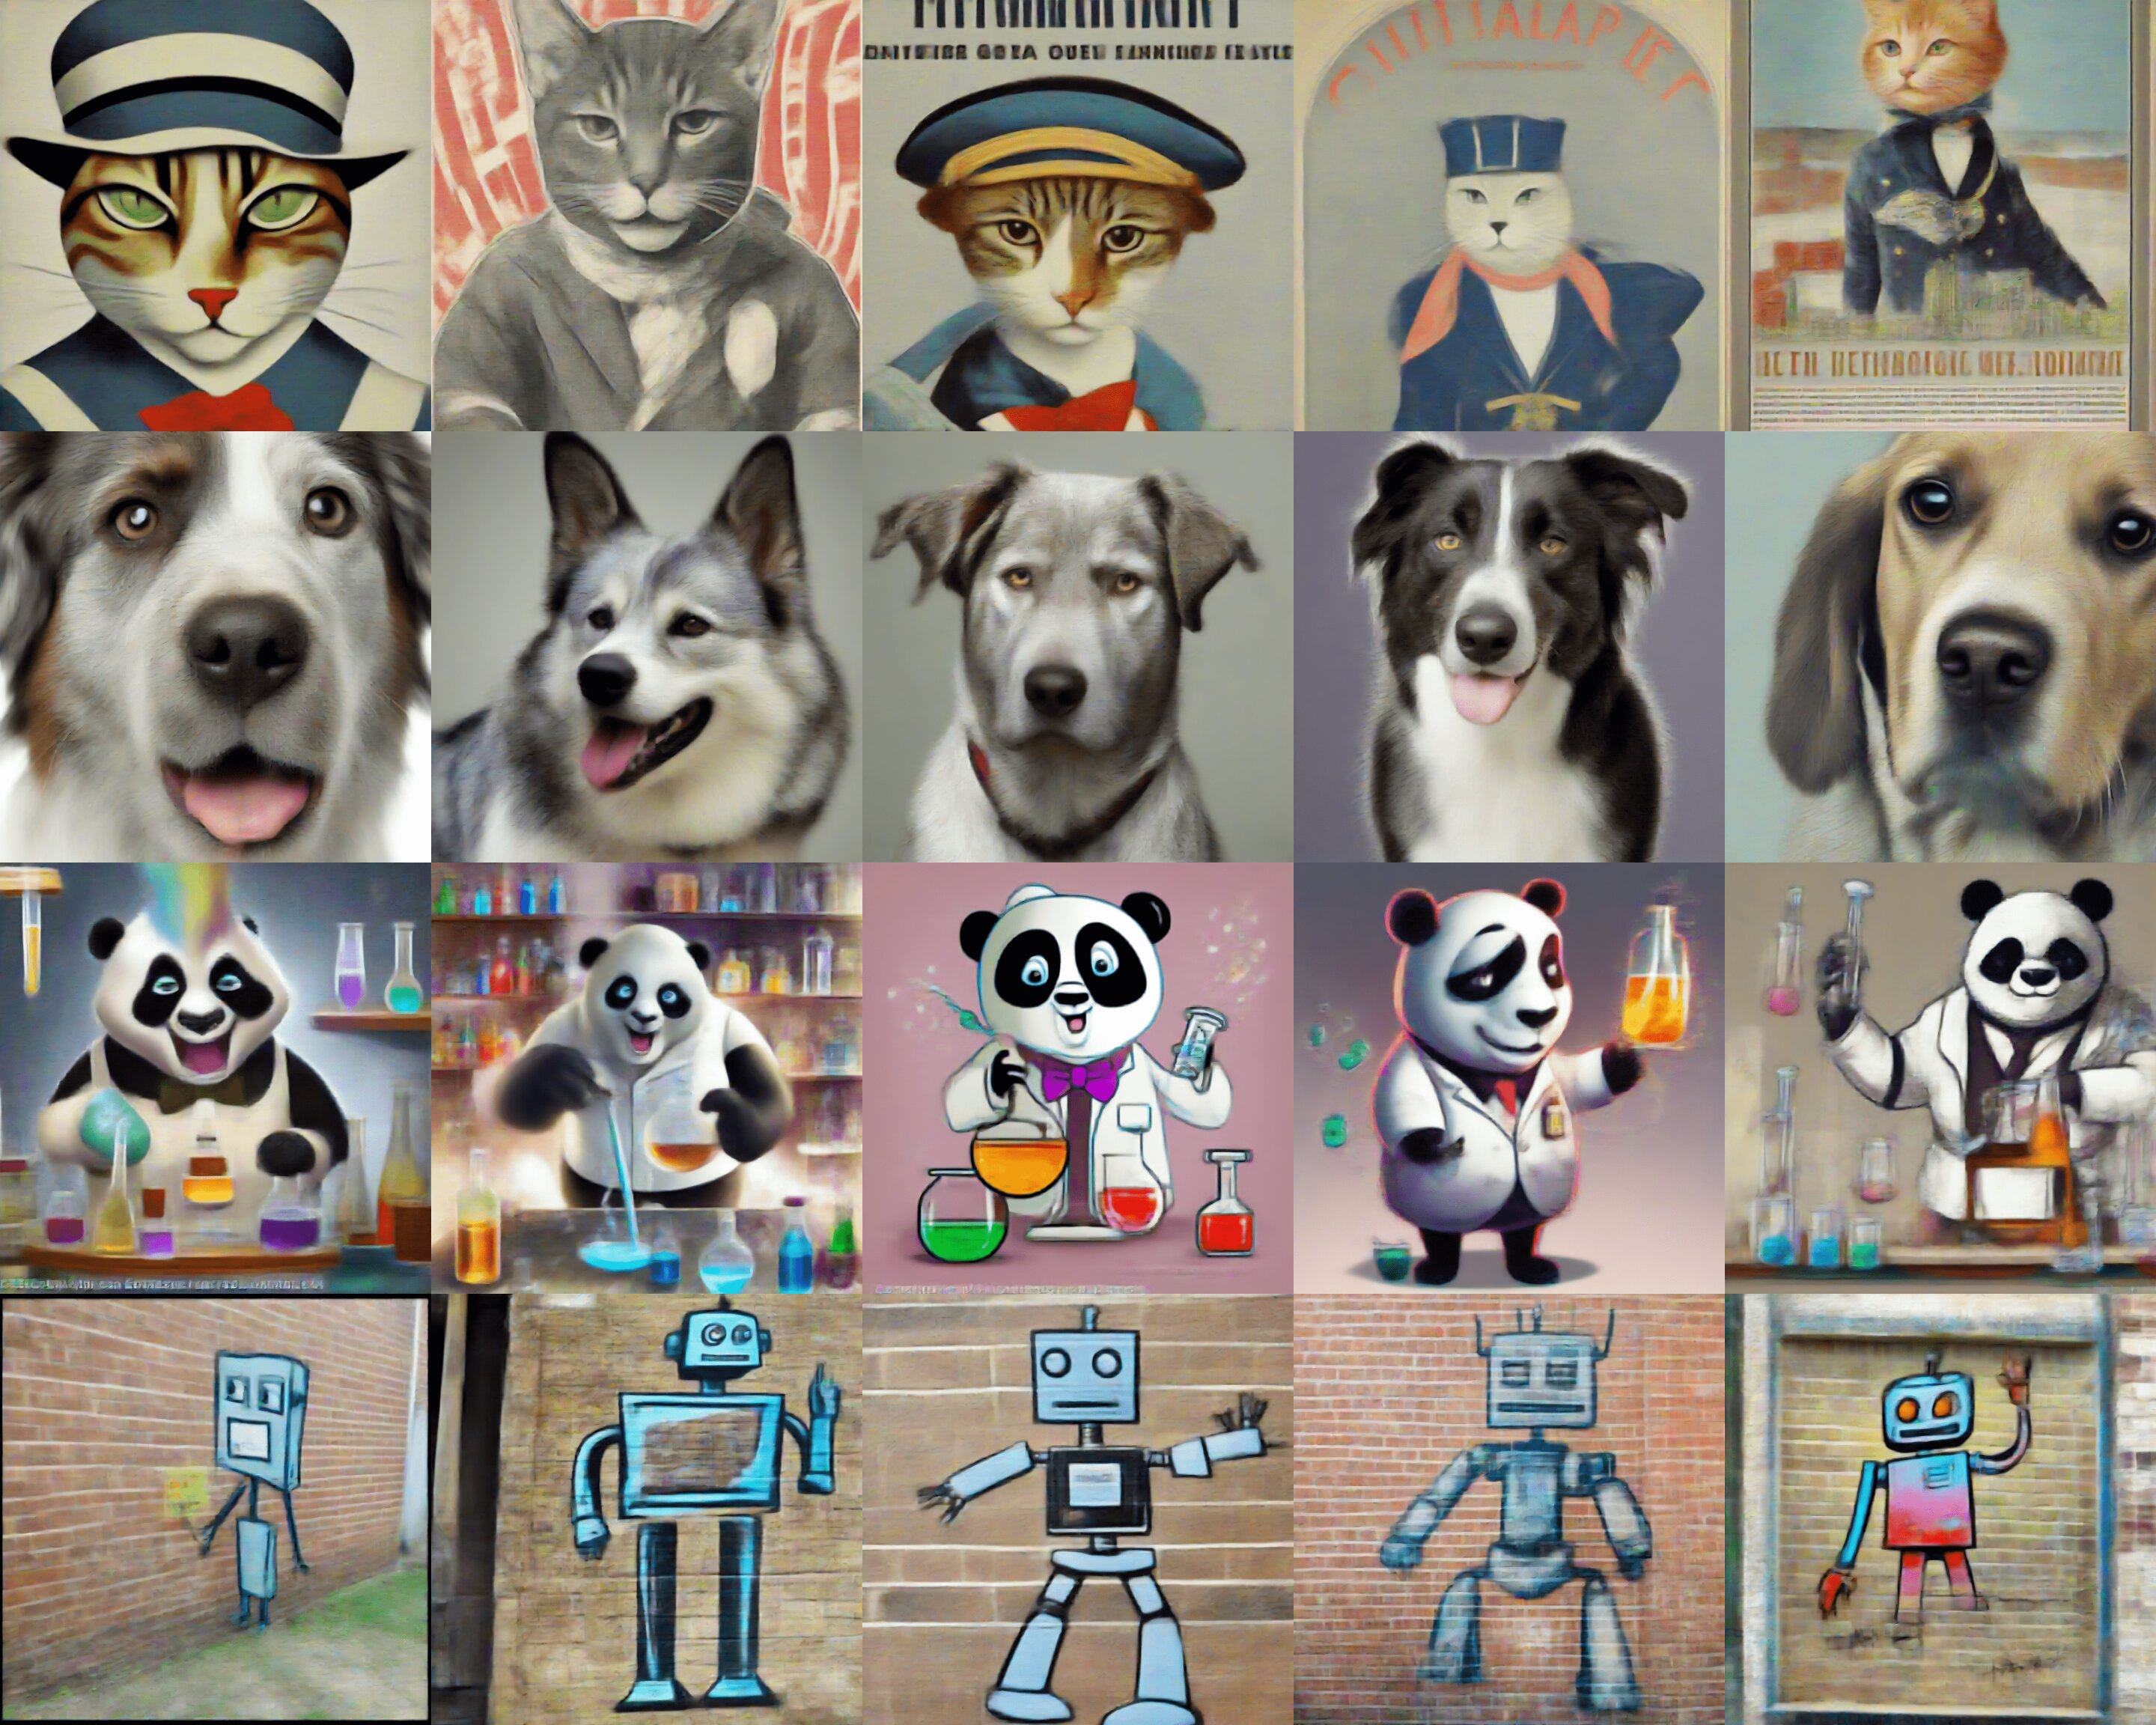 Artificial intelligence trained to draw inspiration from images, not copy them